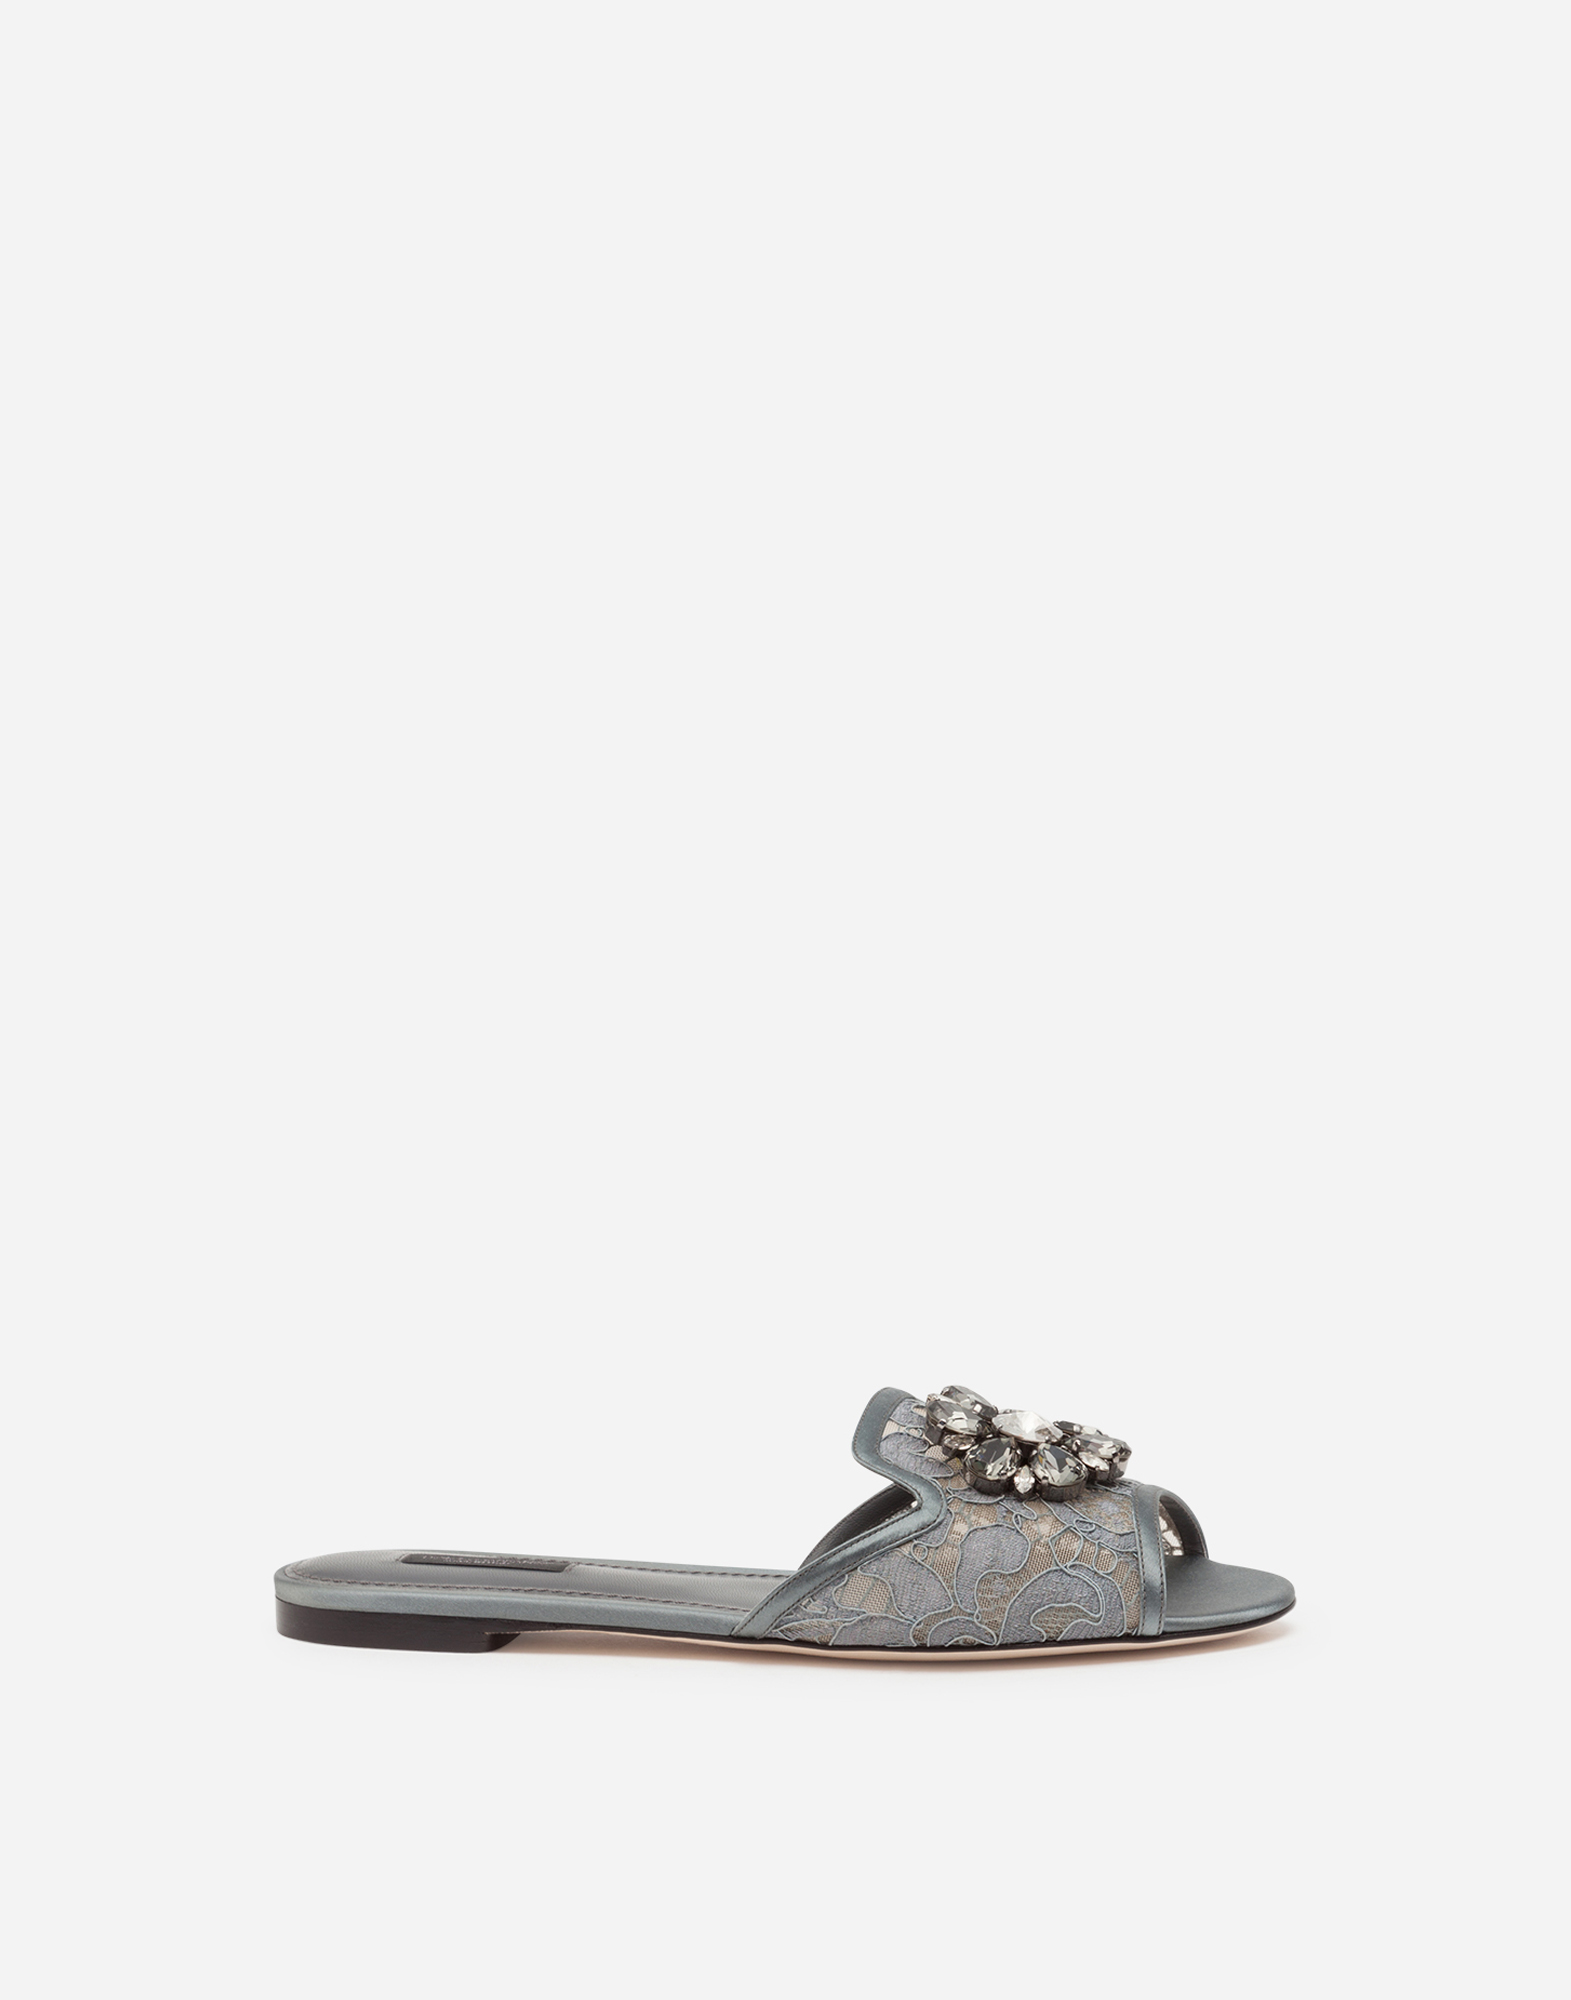 Lace rainbow slides with brooch detailing in Dark Grey